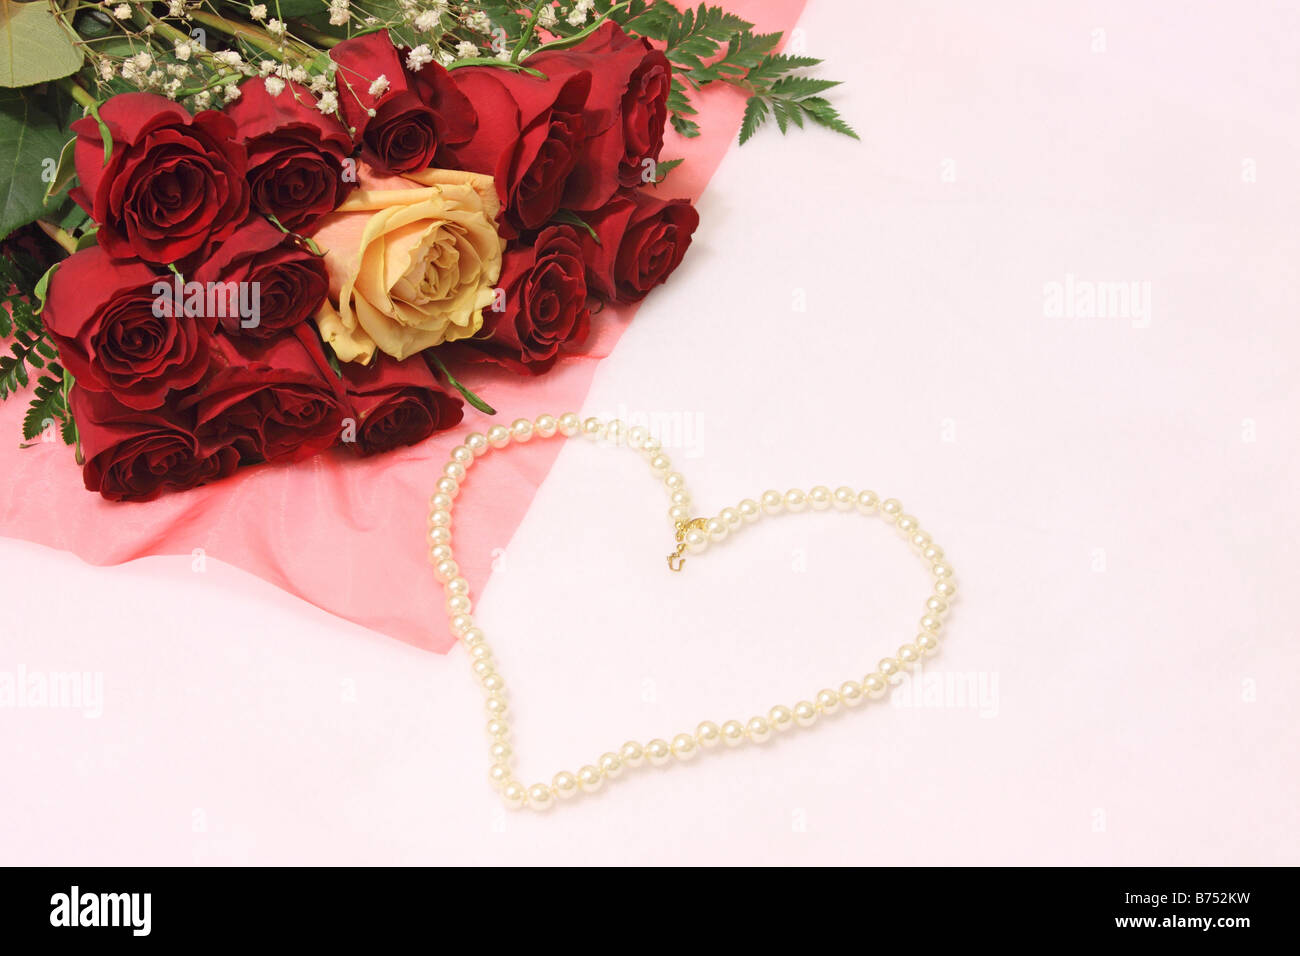 Still life of red roses with one yellow rose in center and a pearl necklace in the shape of a heart on white background Stock Photo